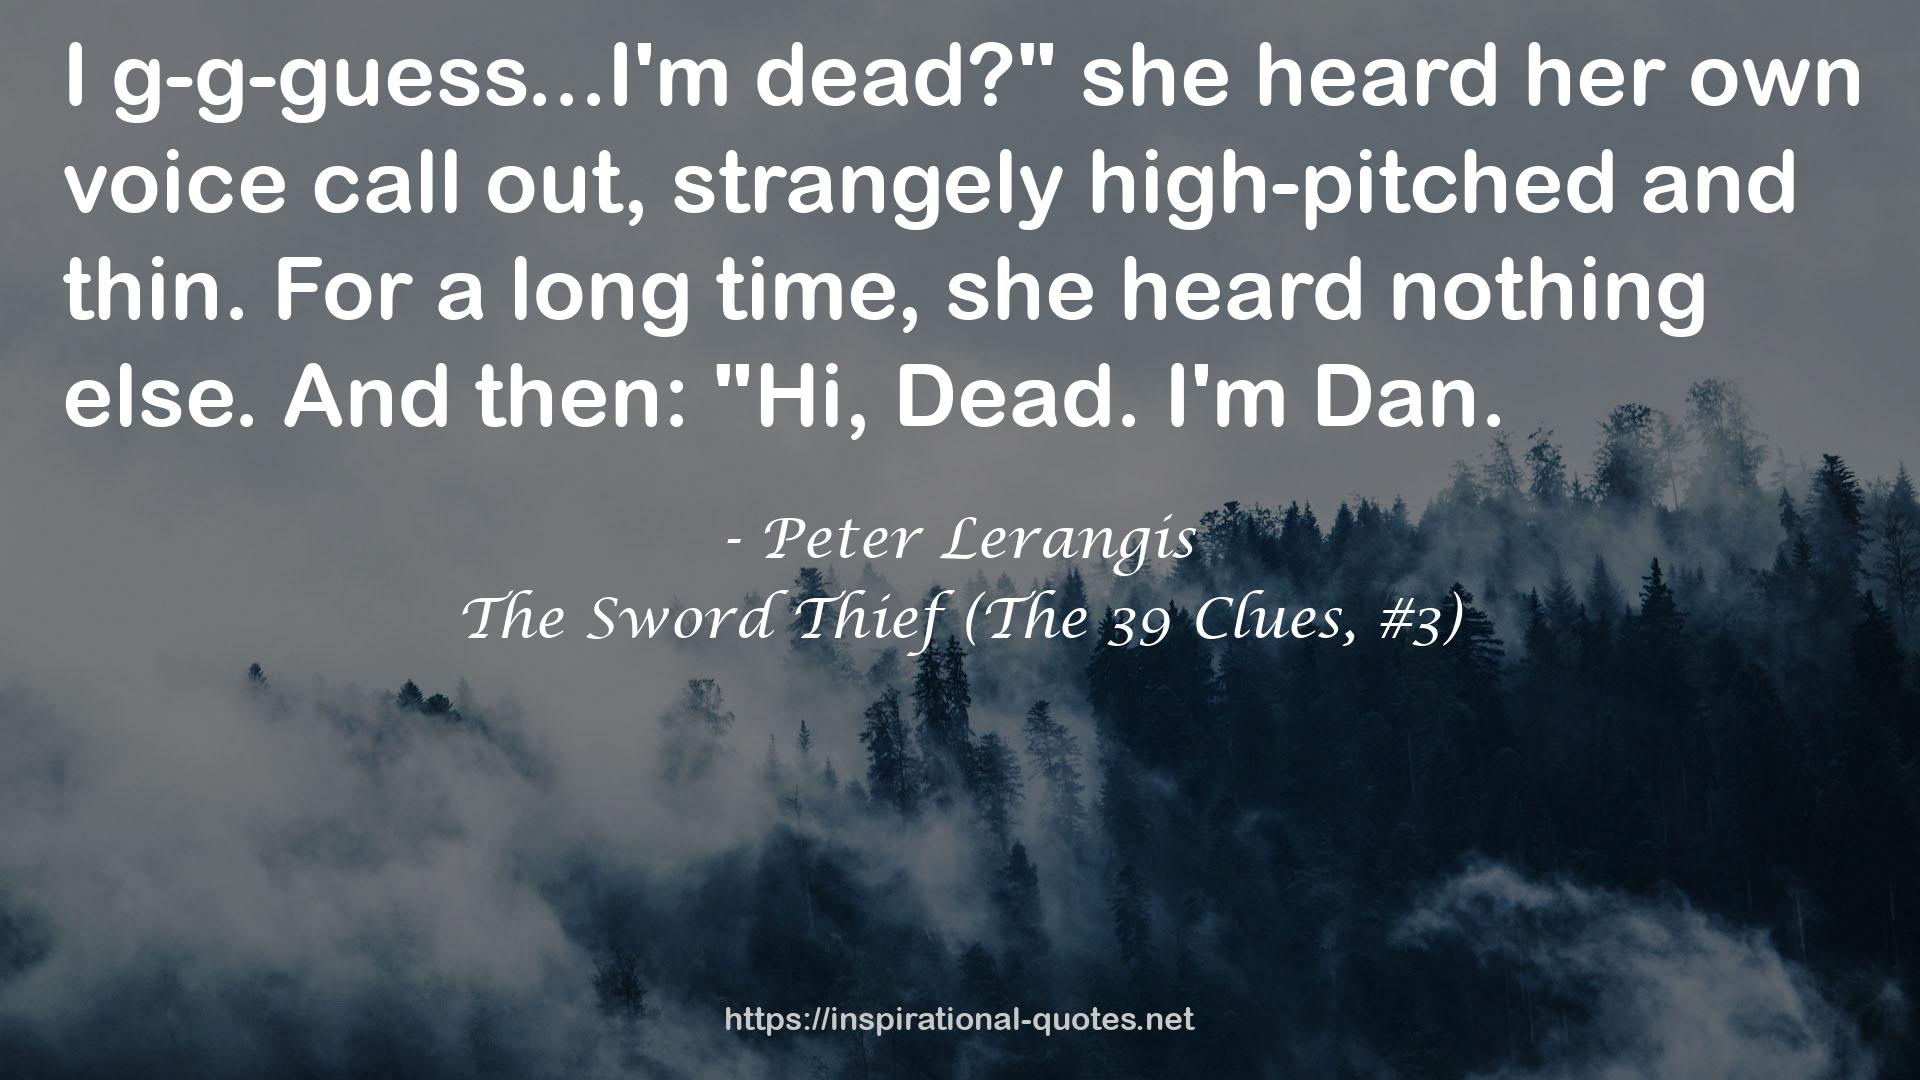 The Sword Thief (The 39 Clues, #3) QUOTES